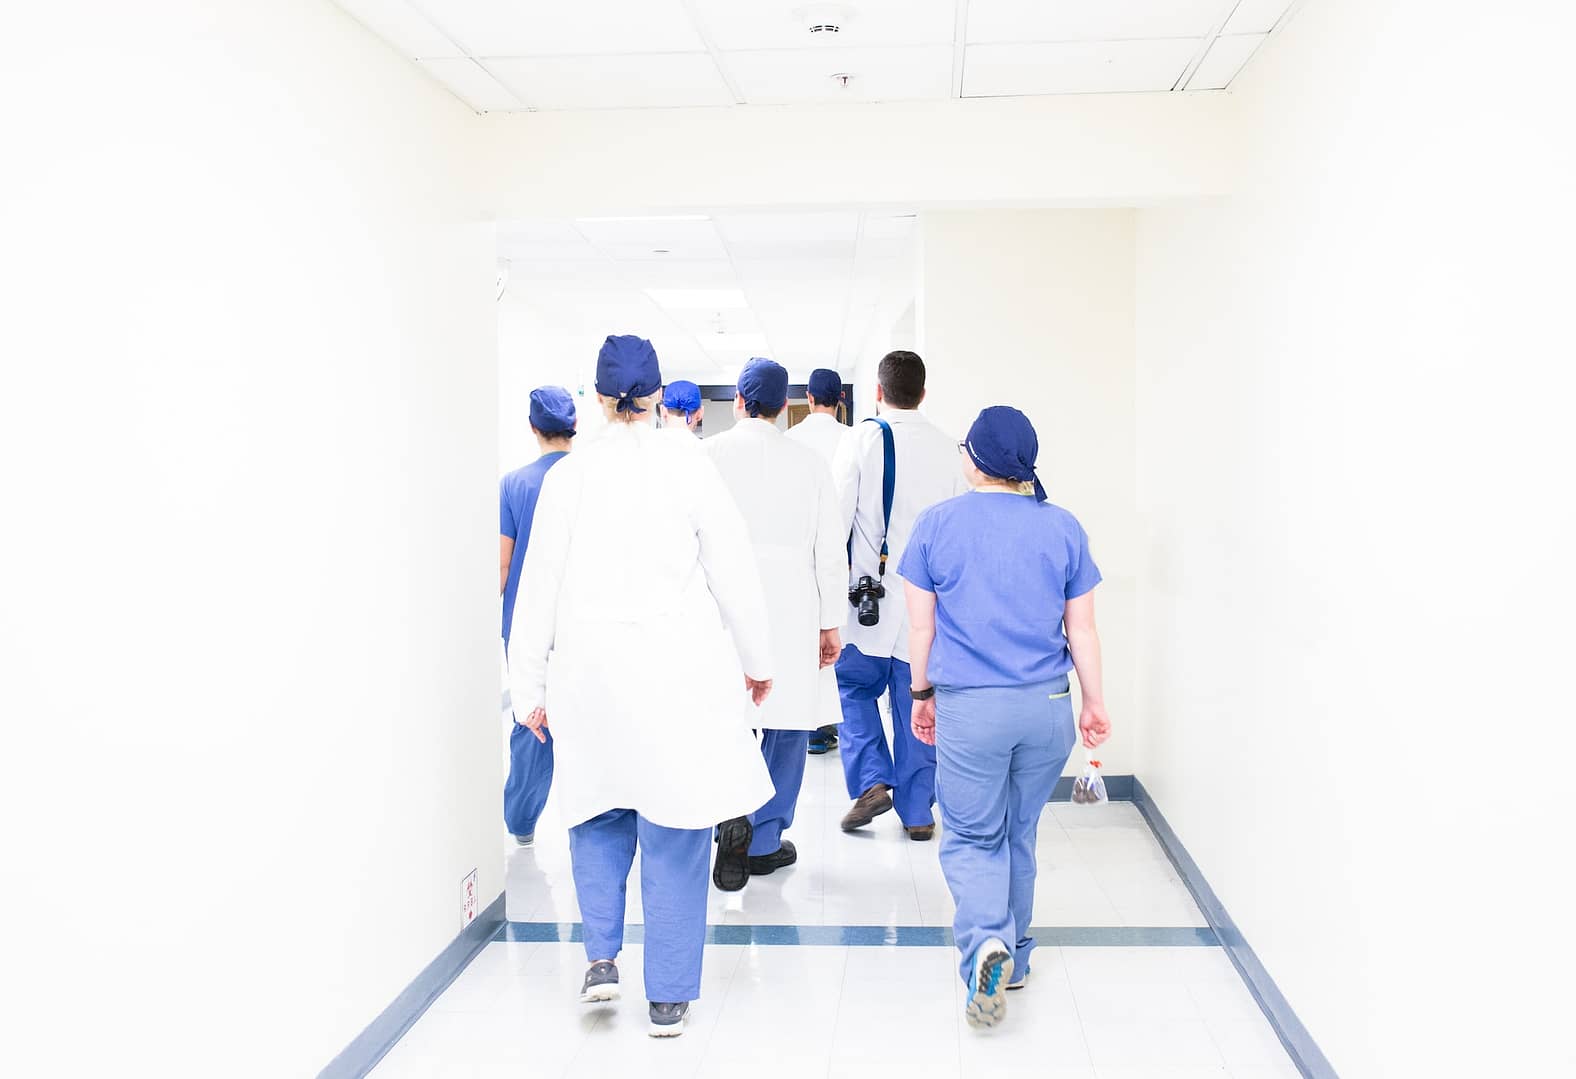 Group of doctors walking down a hallway in a hospital